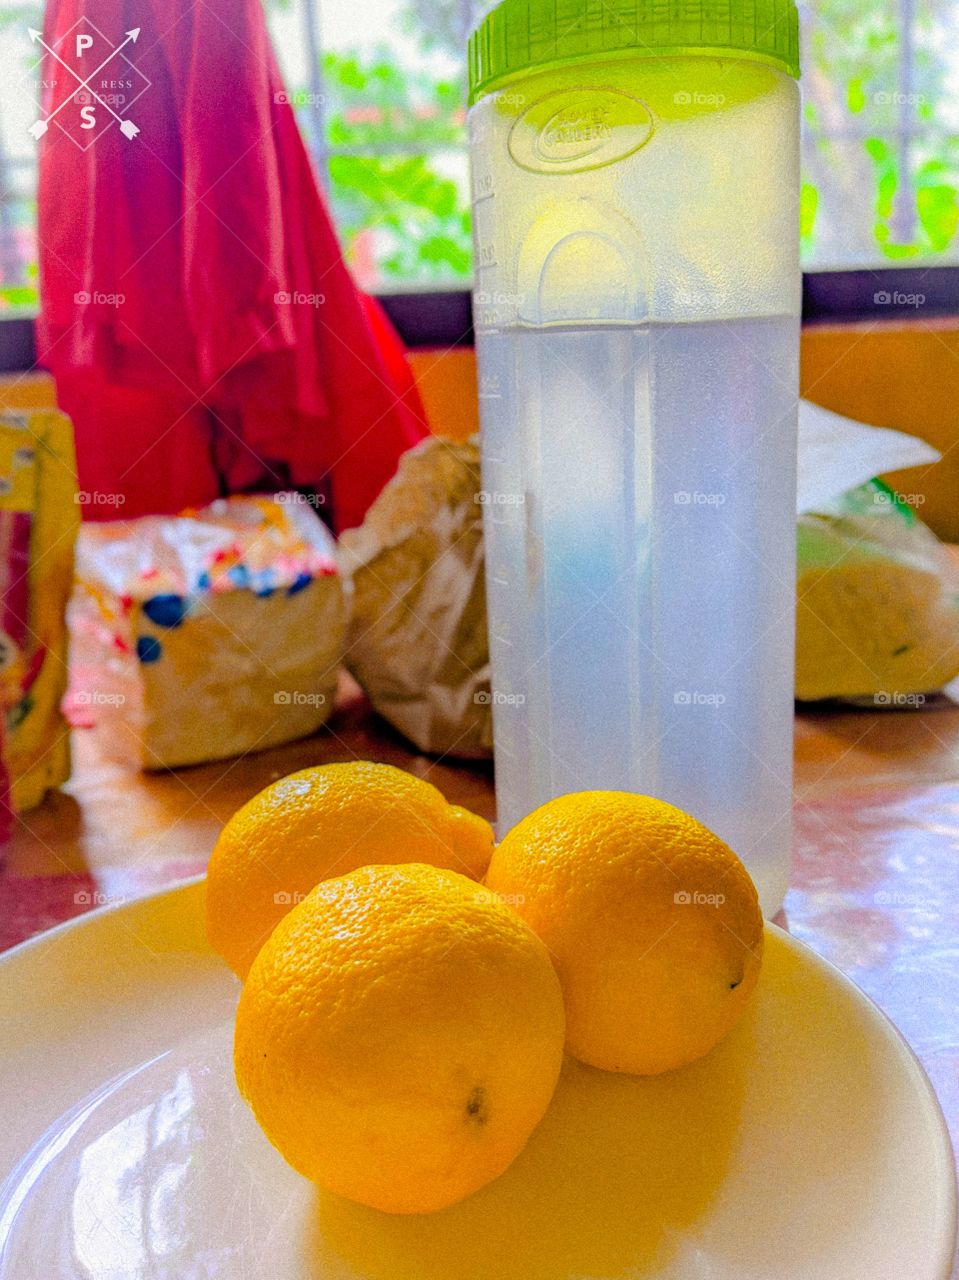 3 lemons and water for a juicy morning